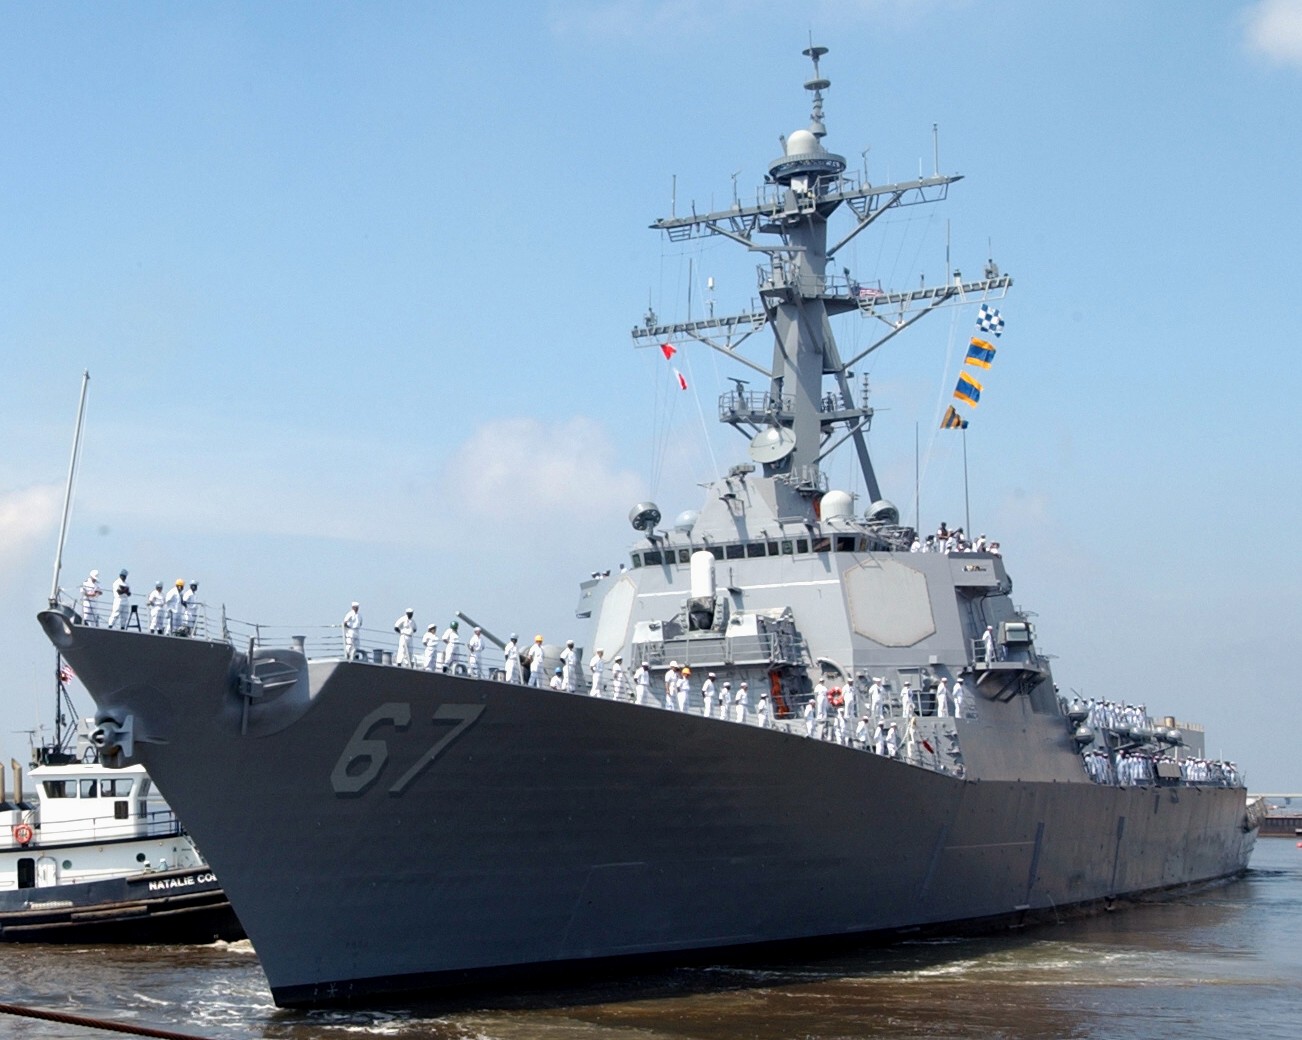 ddg-67 uss cole guided missile destroyer arleigh burke class navy aegis 49 ngss ingalls pascagoula